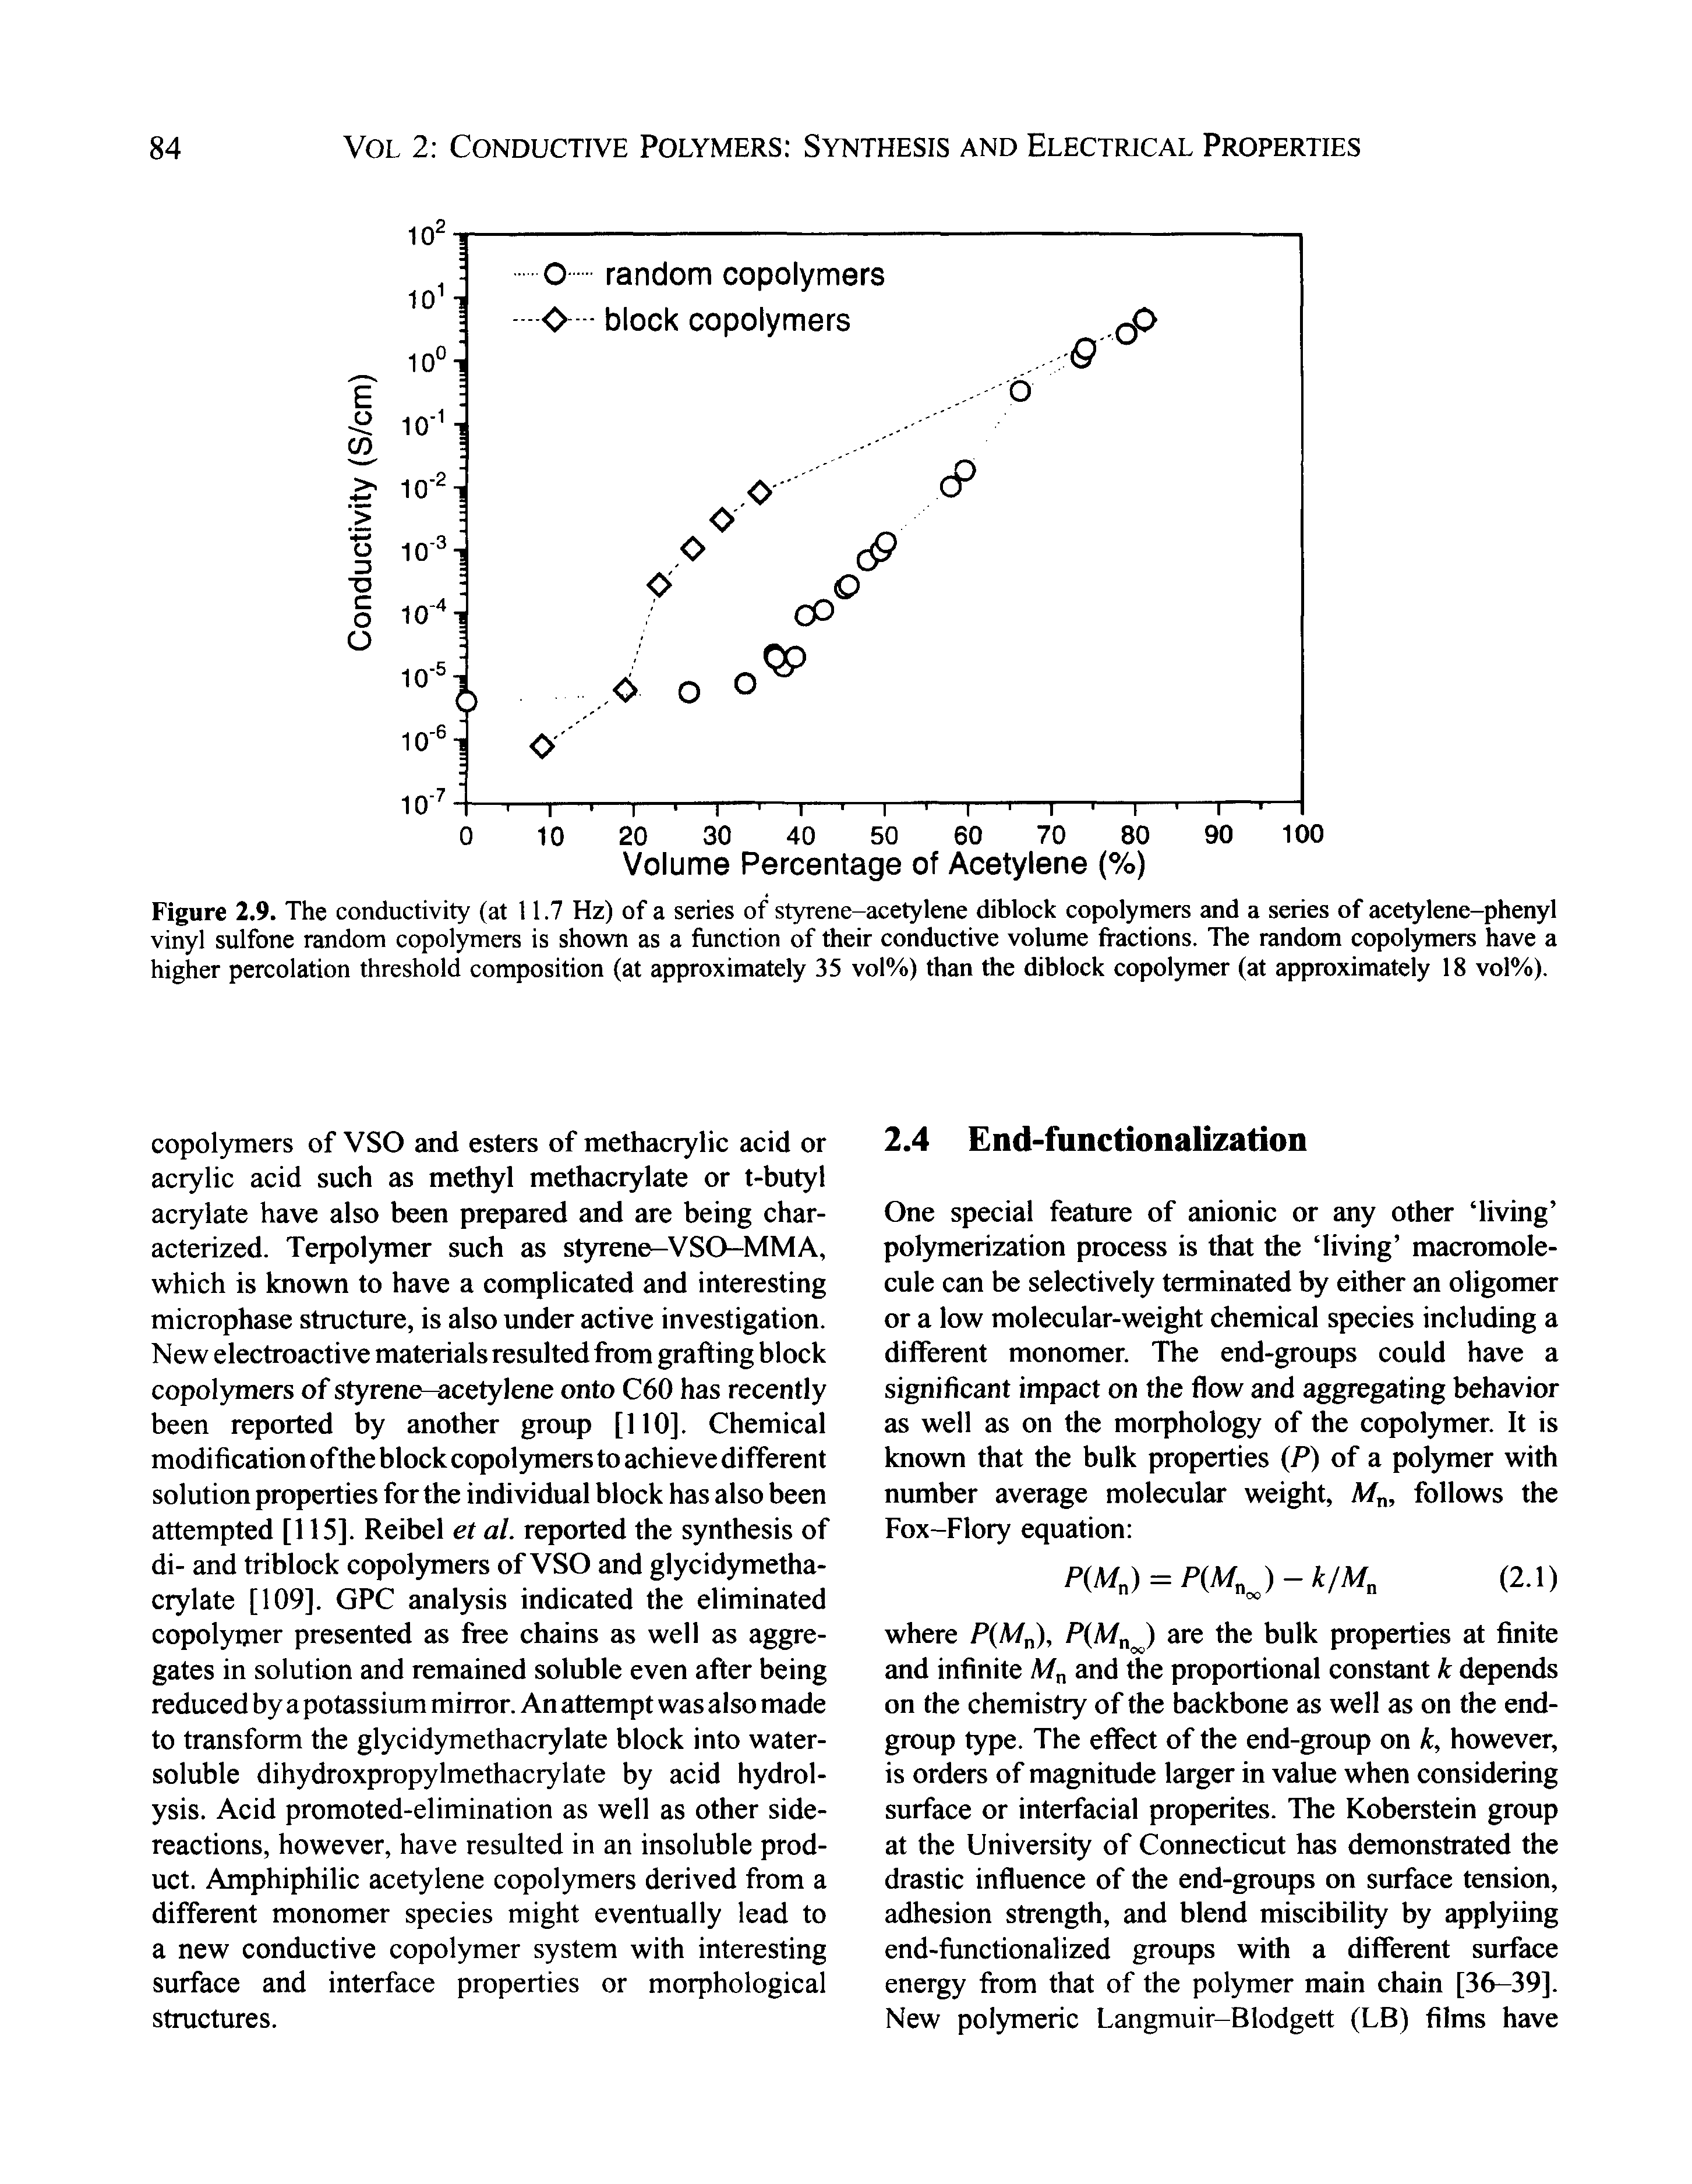 Figure 2.9. The conductivity (at 11.7 Hz) of a series of styrene-acetylene diblock copolymers and a series of acetylene-phenyl vinyl sulfone random copolymers is shown as a function of their conductive volume fractions. The random copolymers have a higher percolation threshold composition (at approximately 35 vol%) than the diblock copolymer (at approximately 18 vol%).